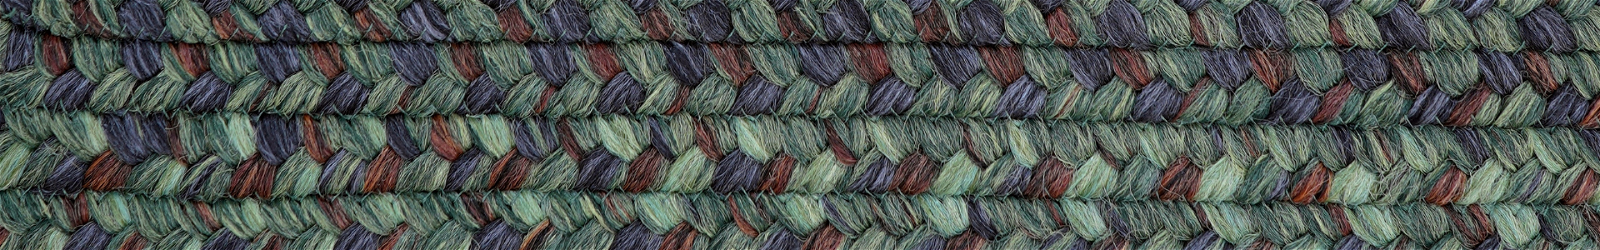 Multi - Oval - Square - Green Braided Rugs